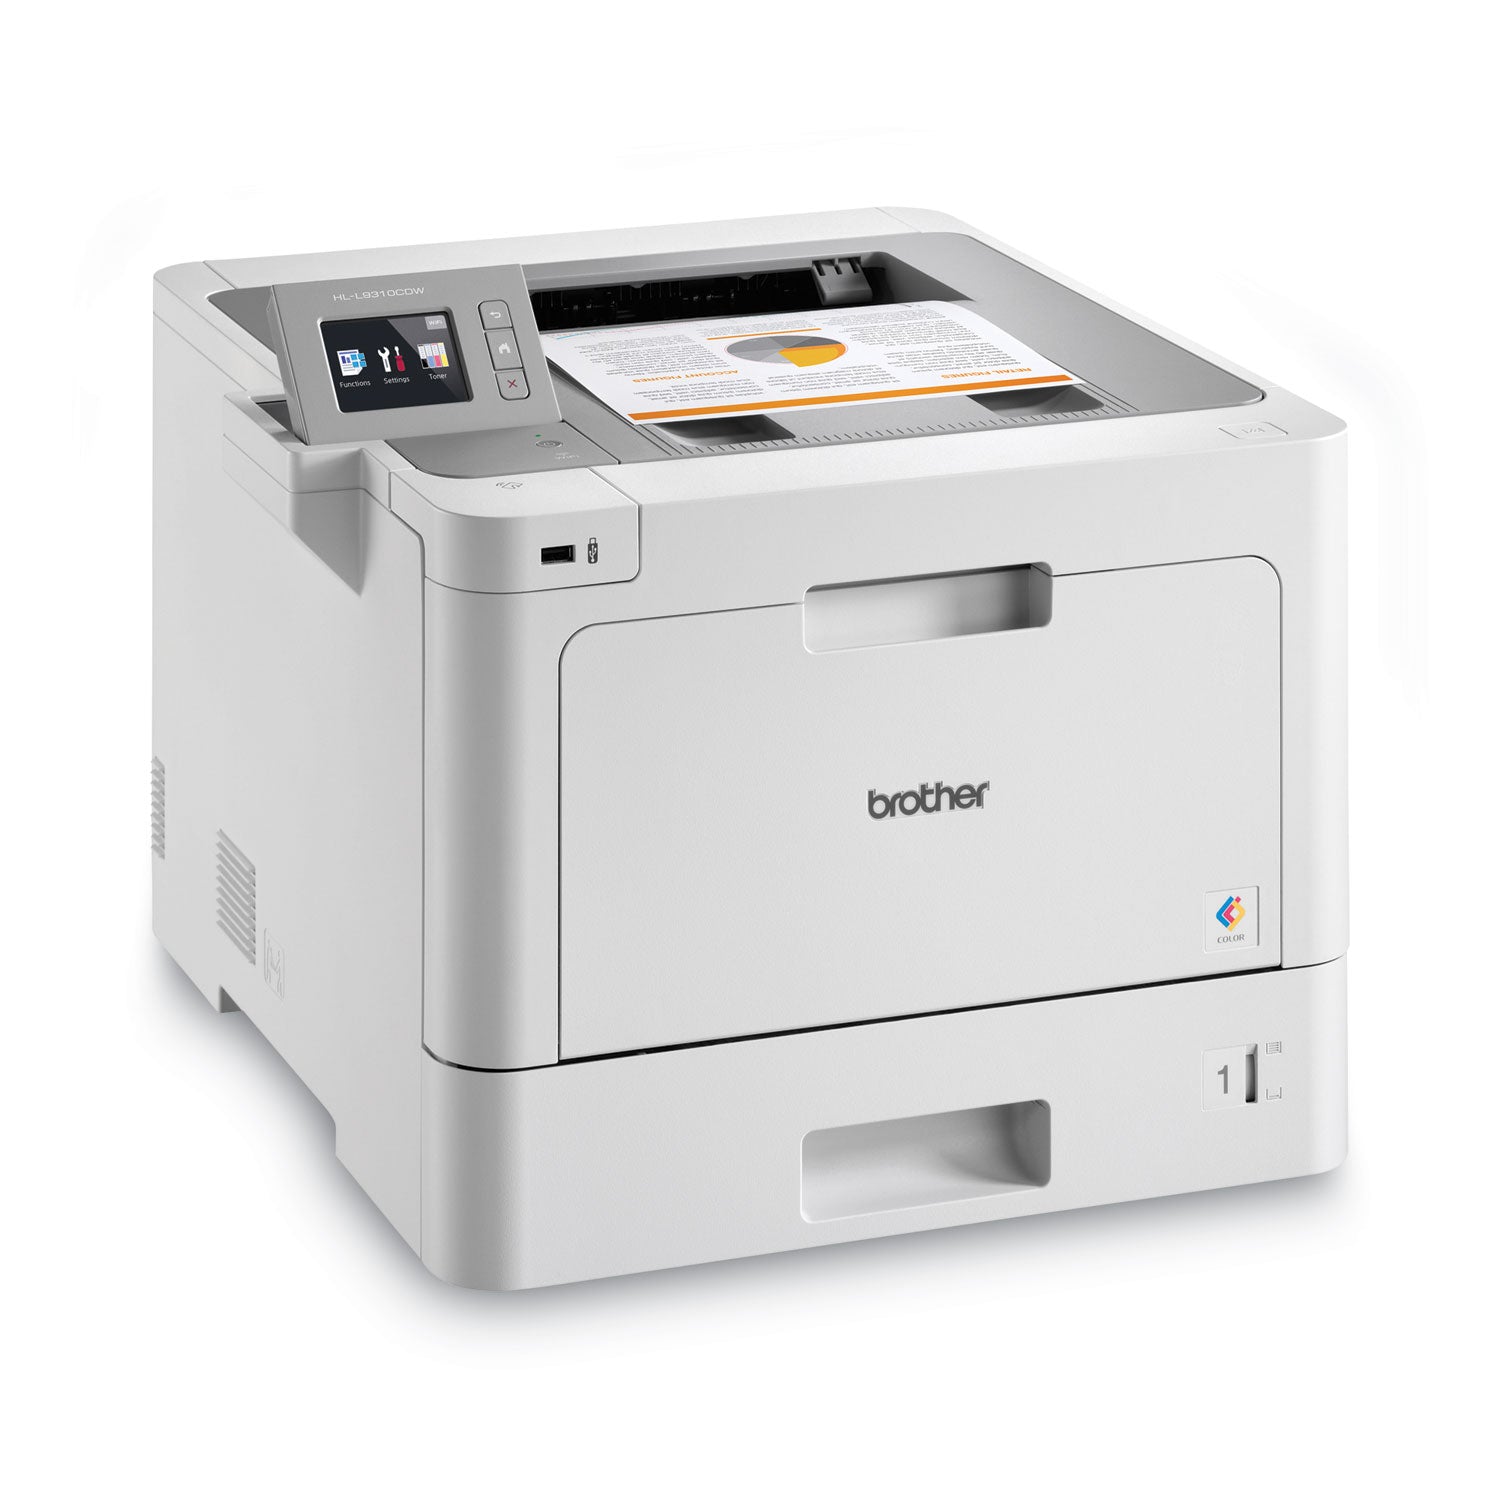 Brother Business Color Laser Printer HL-L9310CDW - for Mid-Size Workgroups with Higher Print Volumes - 2